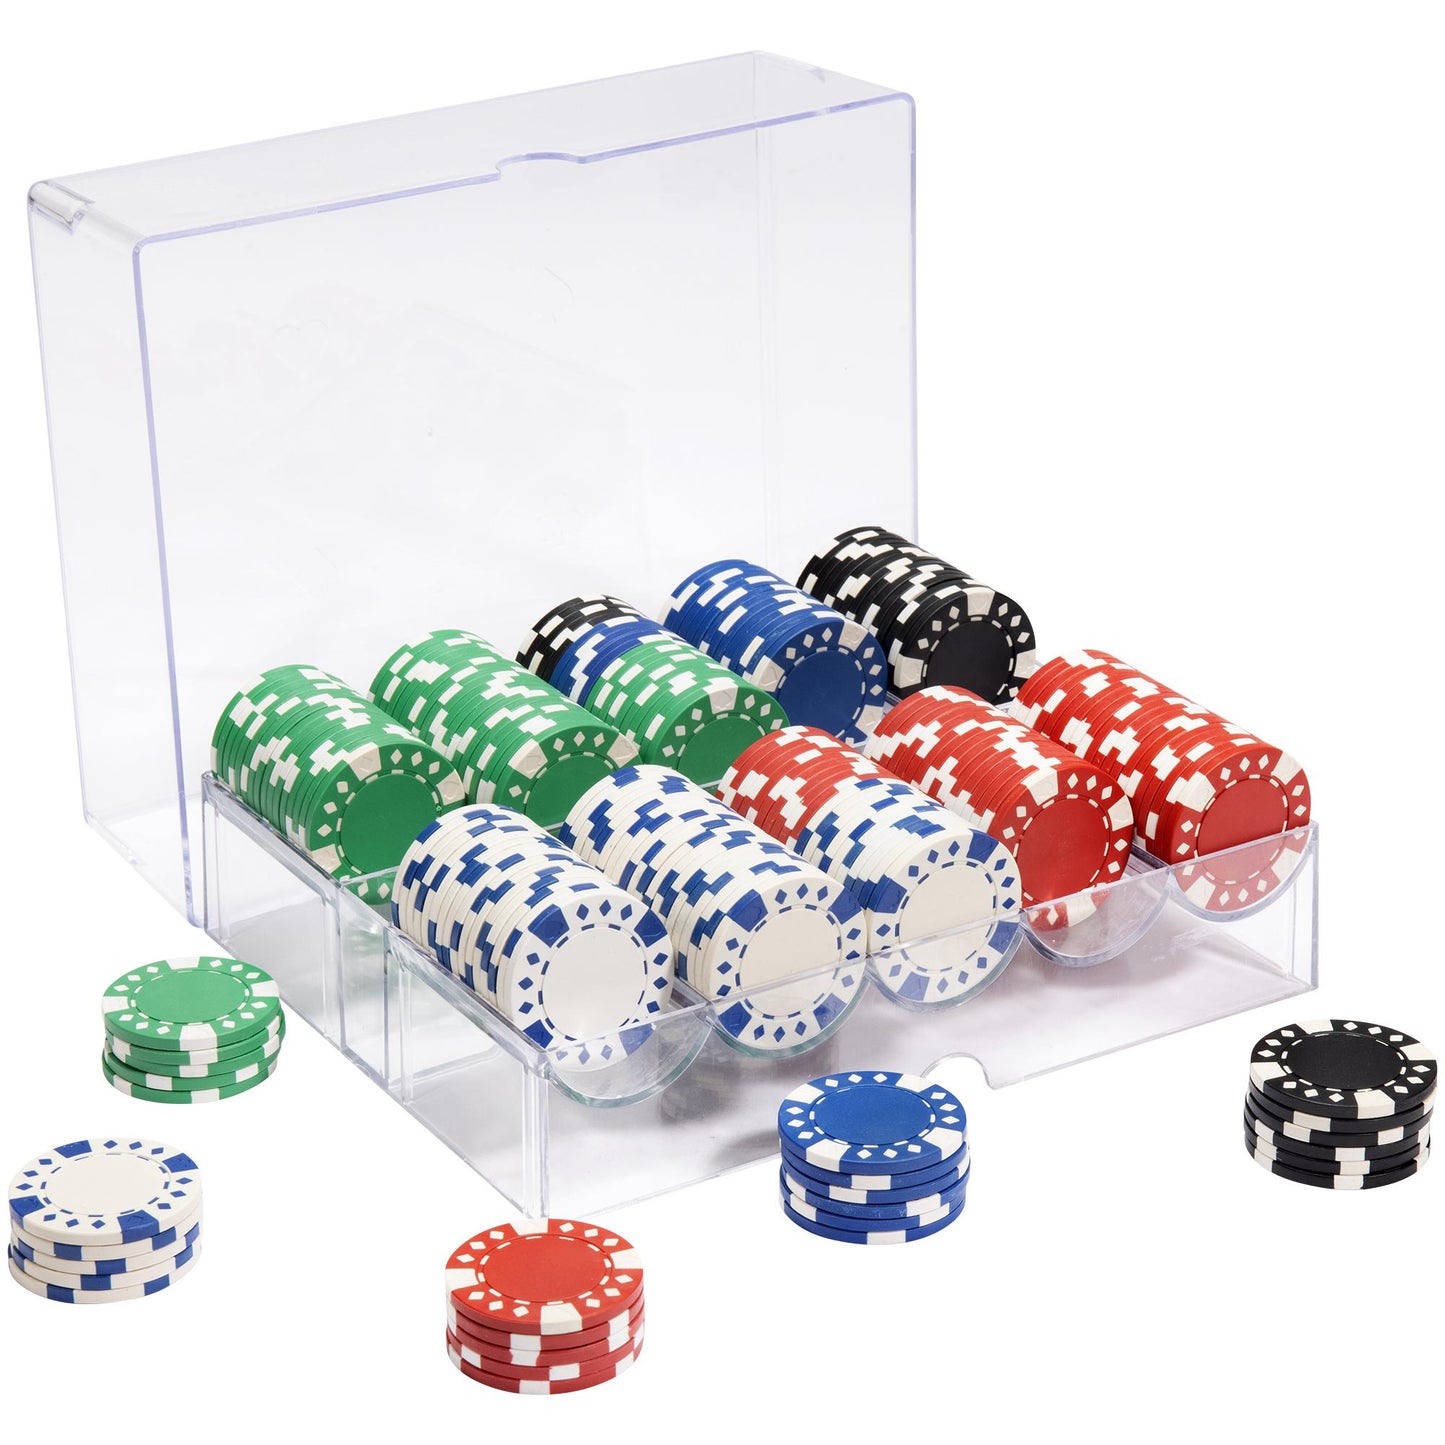 200 Diamond Suited Poker Chips with Acrylic Tray